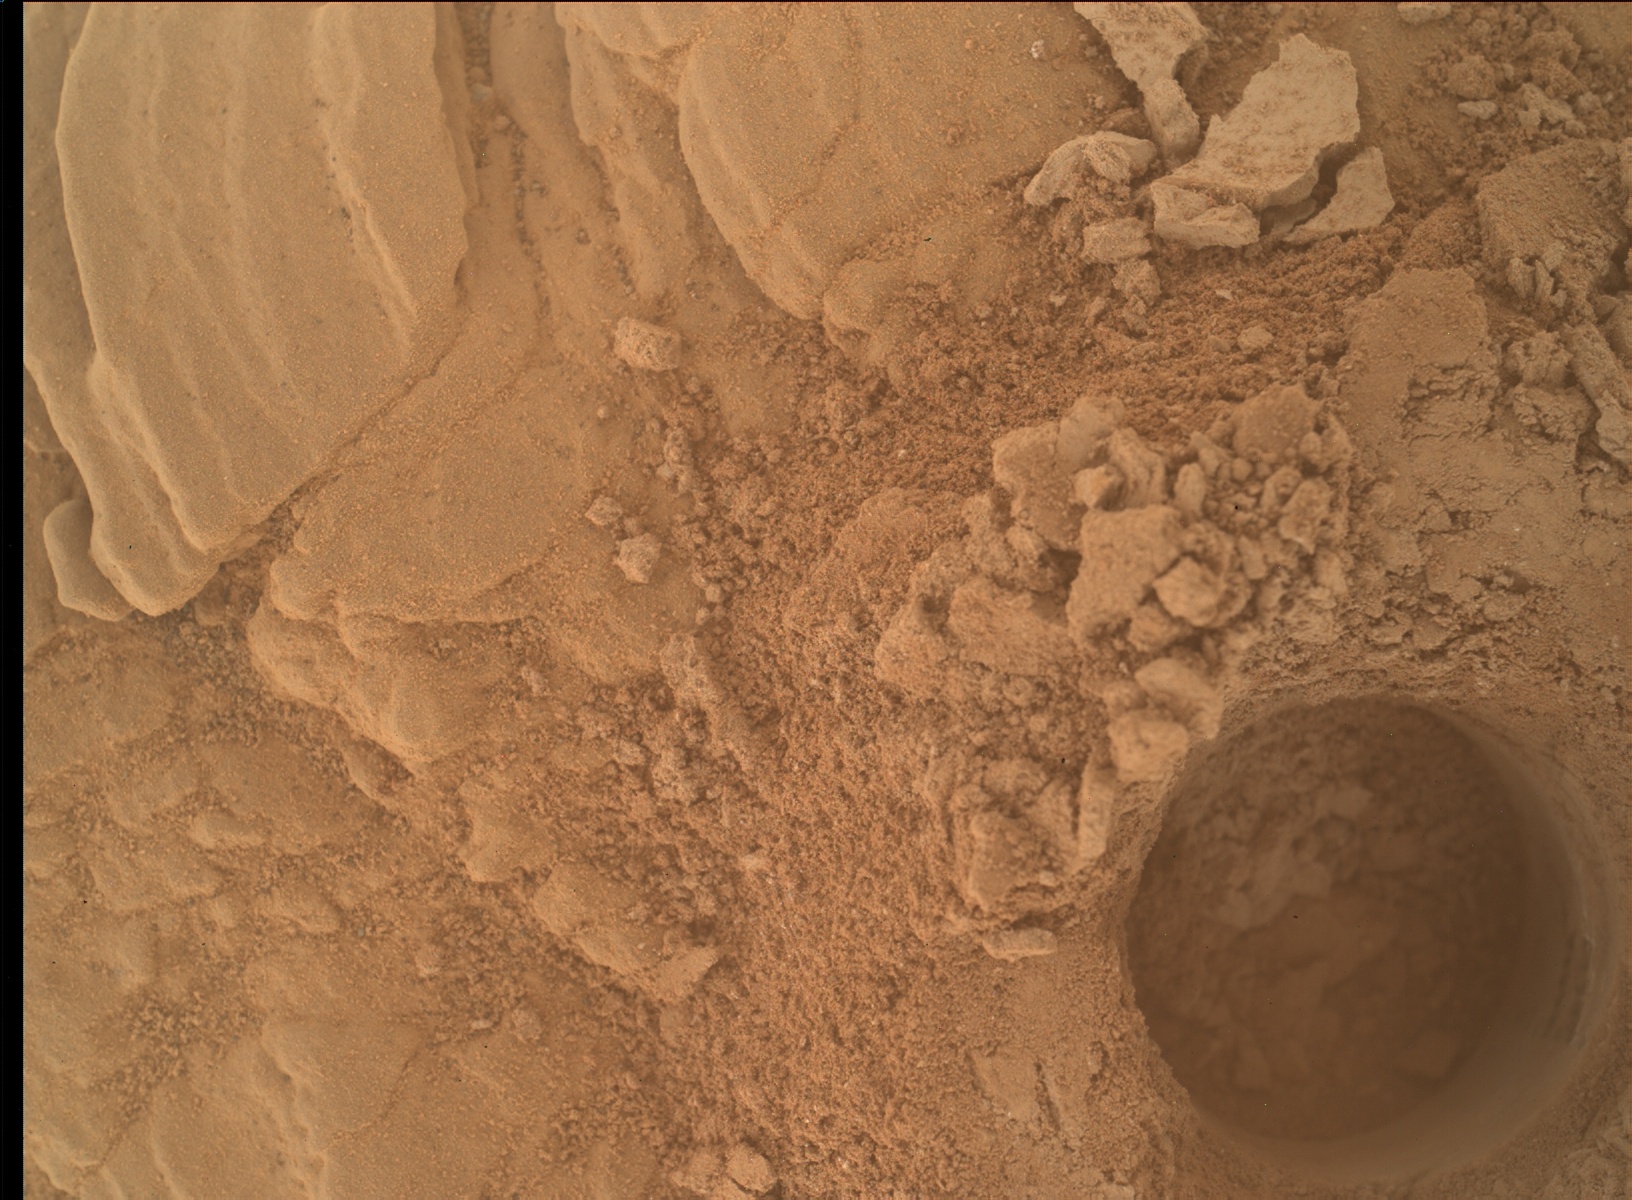 Nasa's Mars rover Curiosity acquired this image using its Mars Hand Lens Imager (MAHLI) on Sol 2554